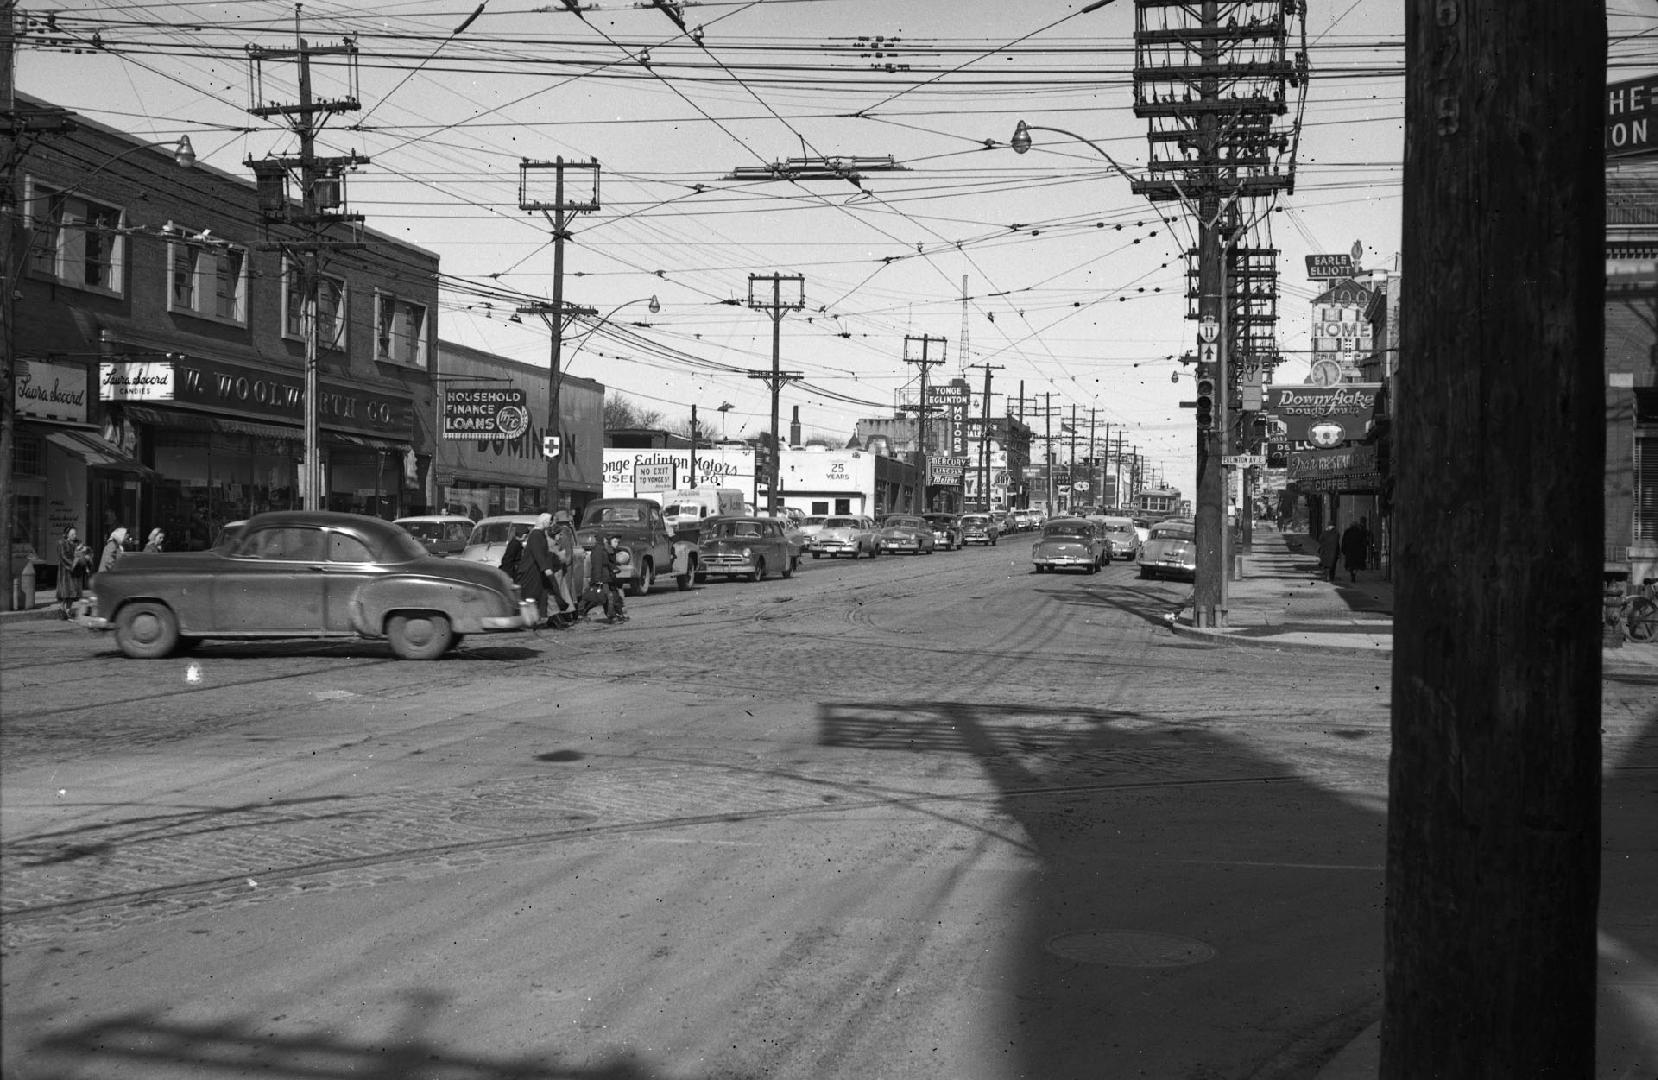 Yonge Street looking north from Eglinton Avenue, Toronto, Ontario. Image shows a street view wi ...